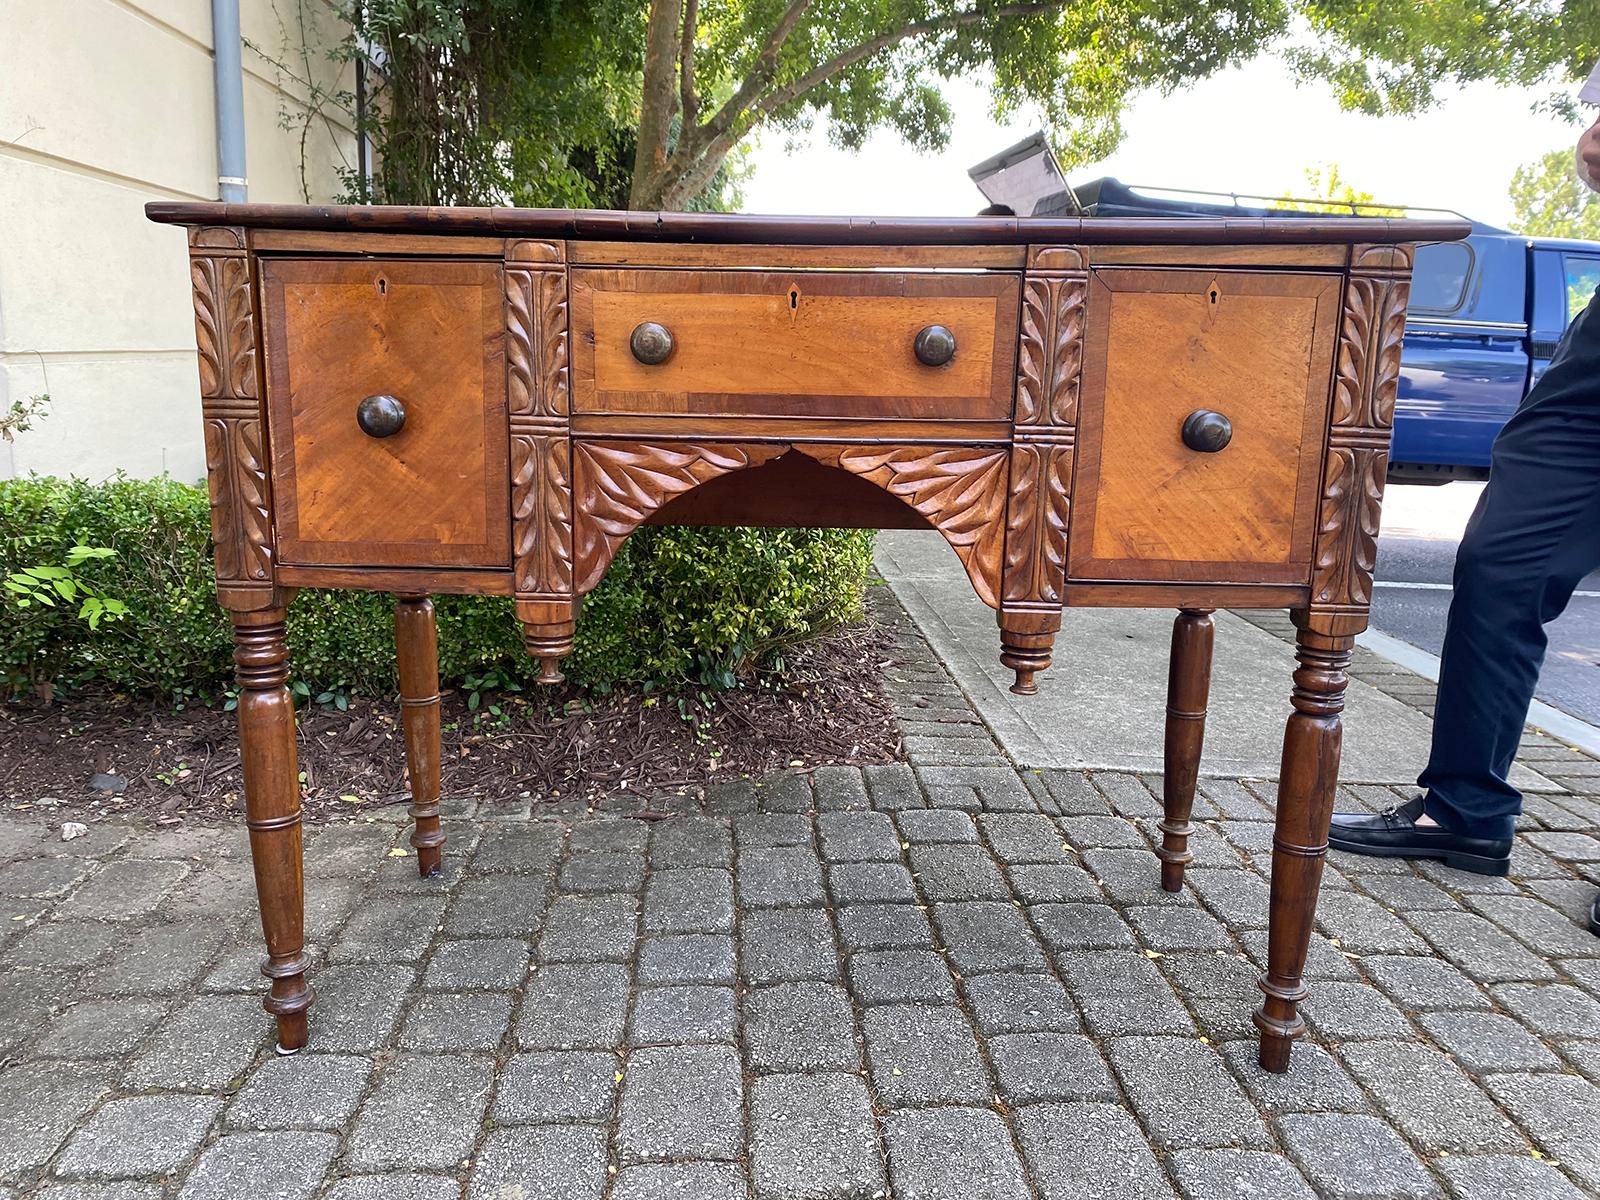 19th century Anglo-Caribbean (Possibly Jamaica or St Croix) sideboard / brandy board. Also referred to as a cupping table.